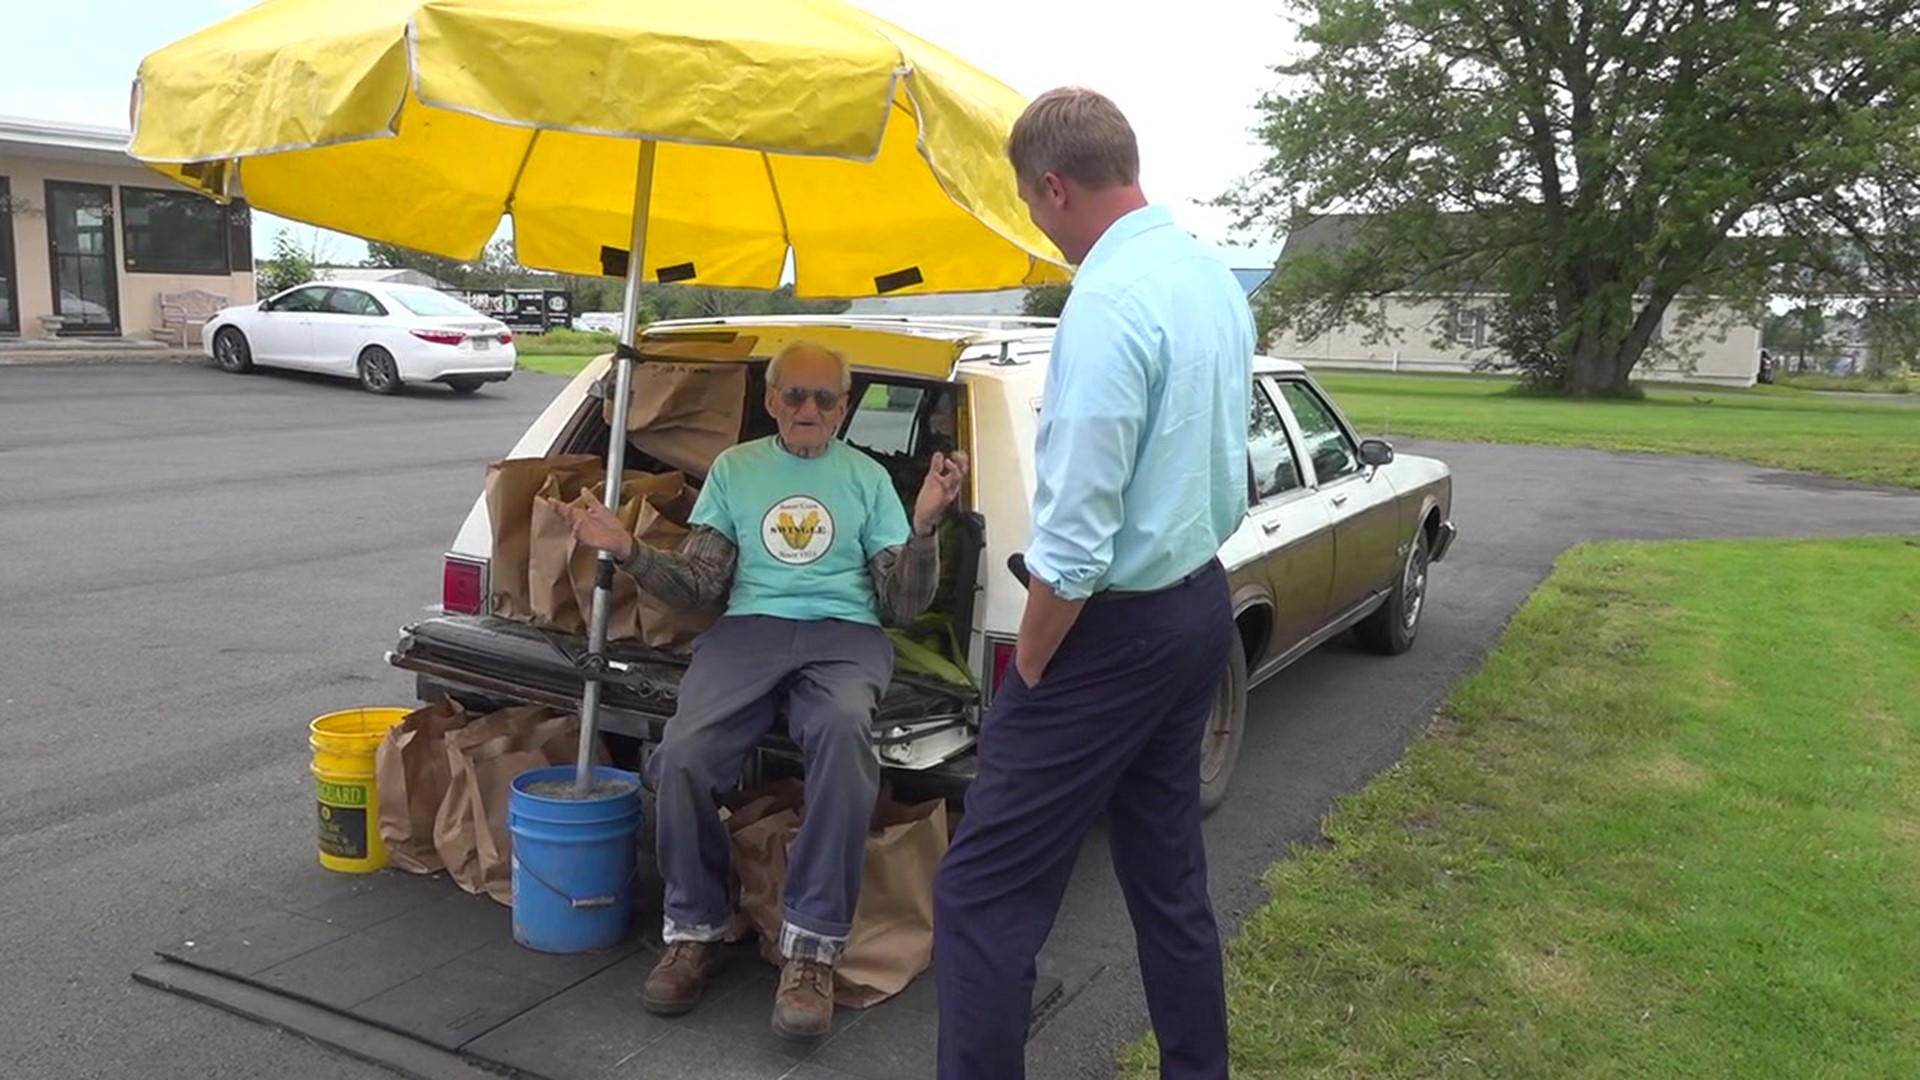 All you have to do is see the station wagon, umbrella, and older gentleman to know this is a unique corn stand, but it's much more of a story than that.